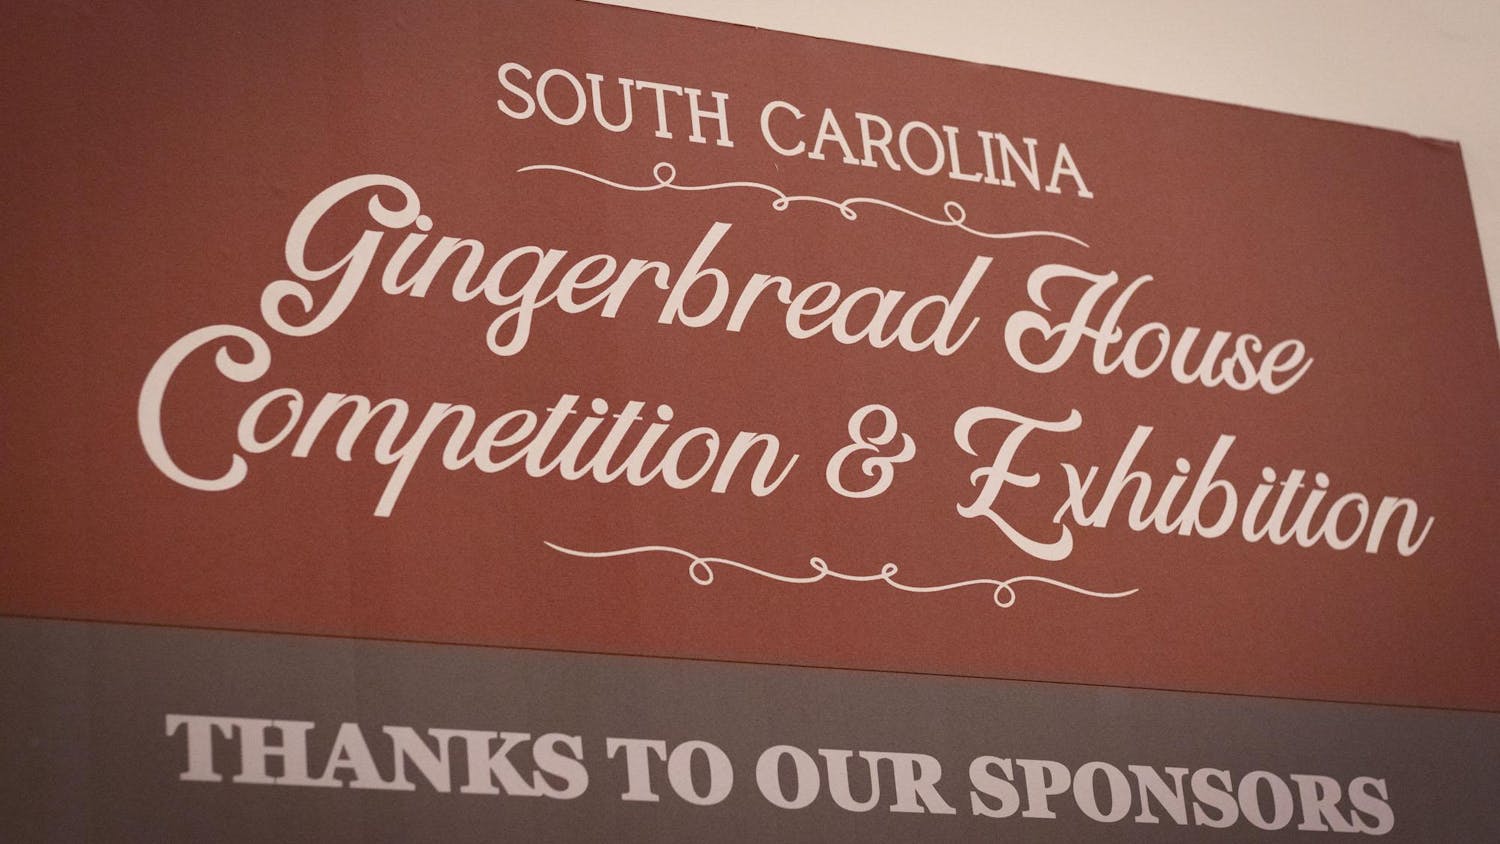 A sign for the first annual Gingerbread Contest and Exhibition presented by NoMa Warehouse and Davis Architecture. All of the proceeds made by the event were awarded to Rapid Shelter Columbia.